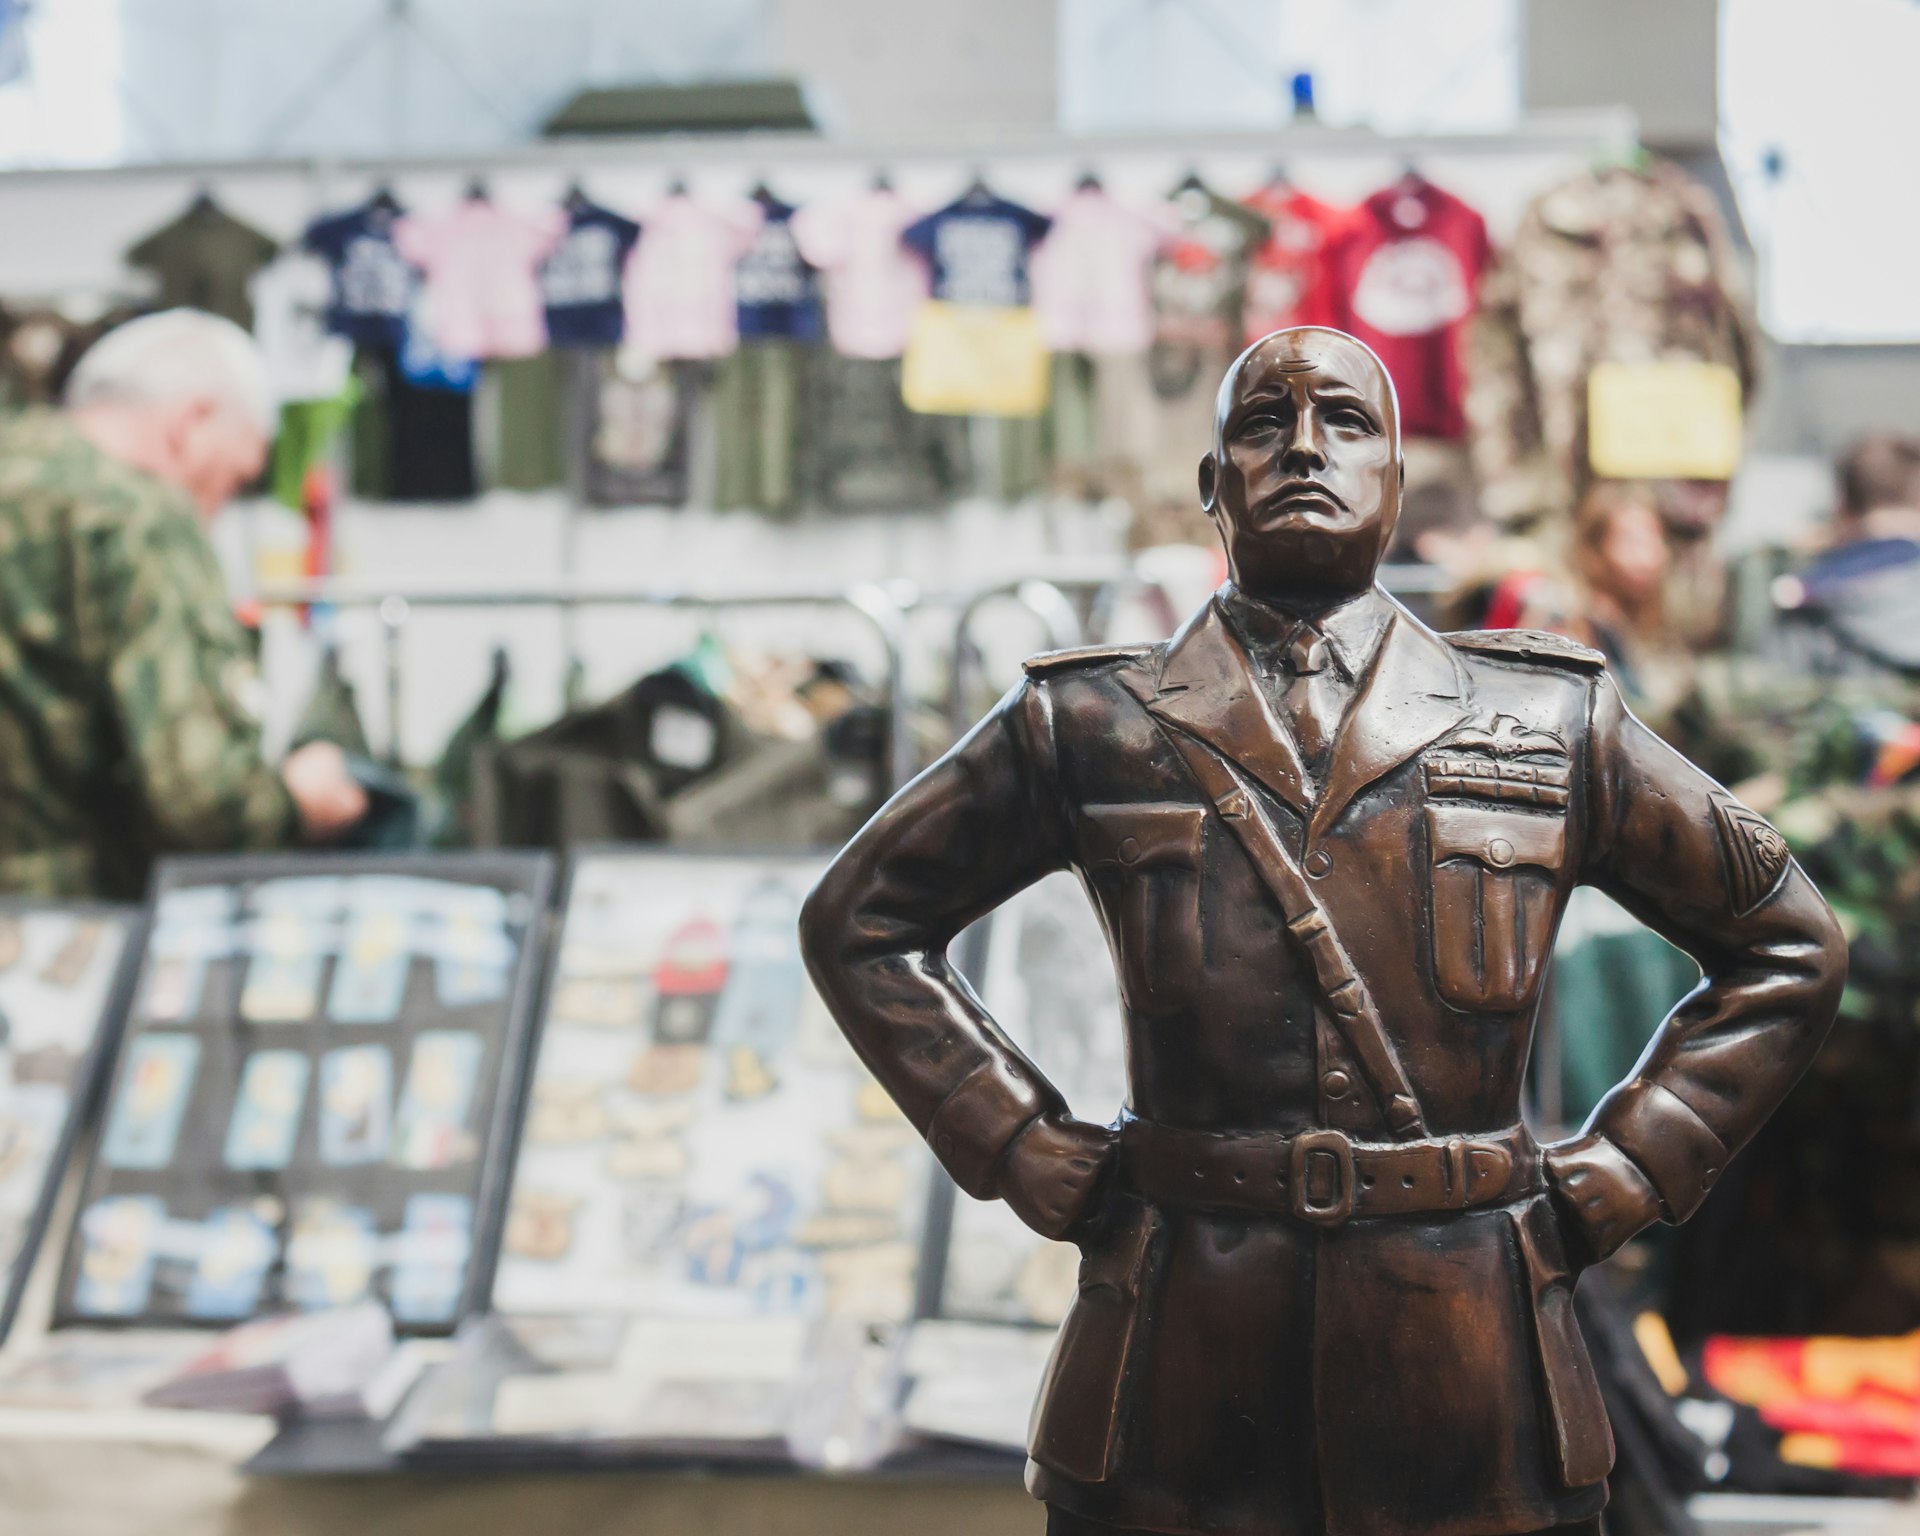 A statue of Mussolini is on display